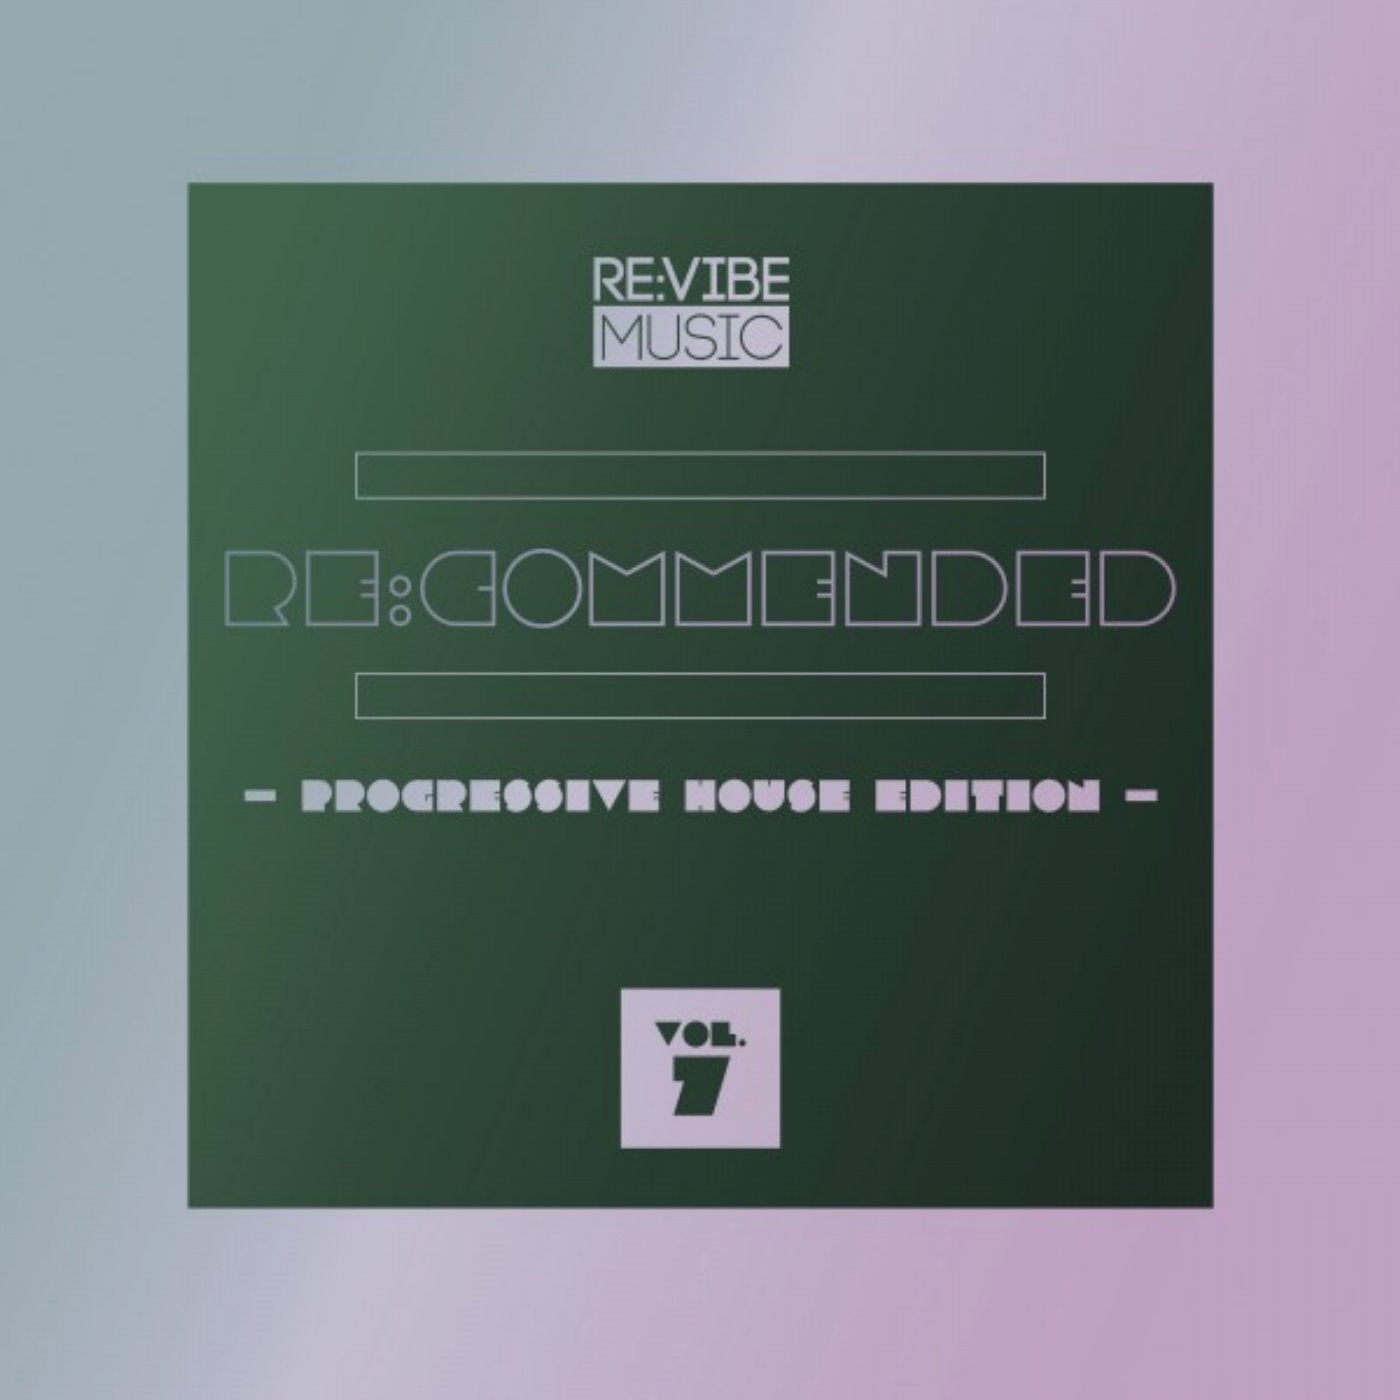 Re:Commended - Progressive House Edition, Vol. 7